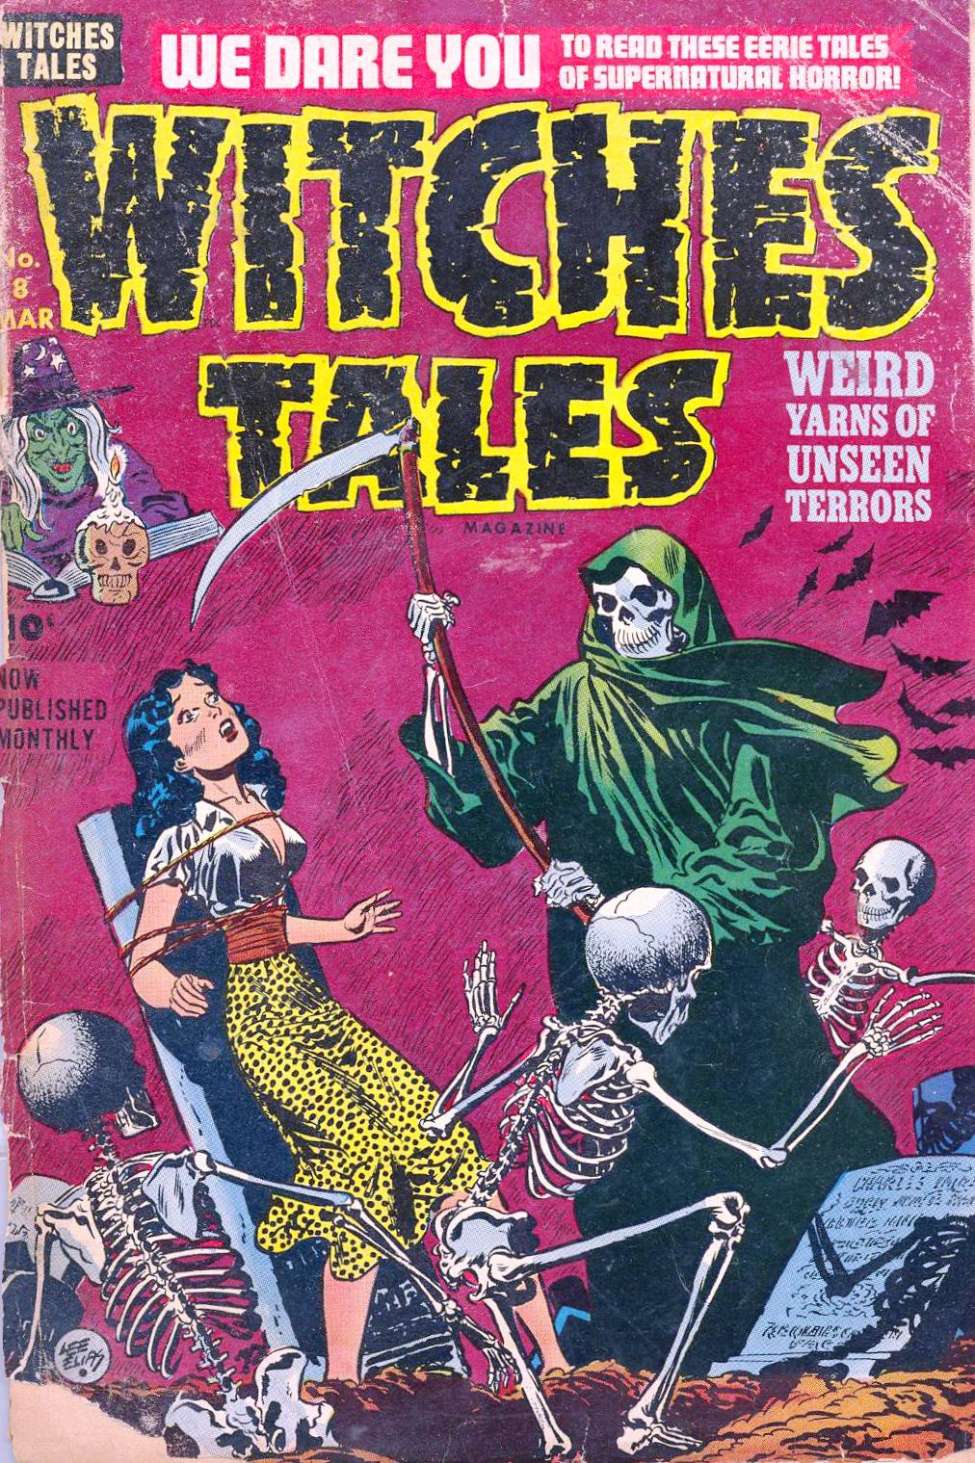 Book Cover For Witches Tales 8